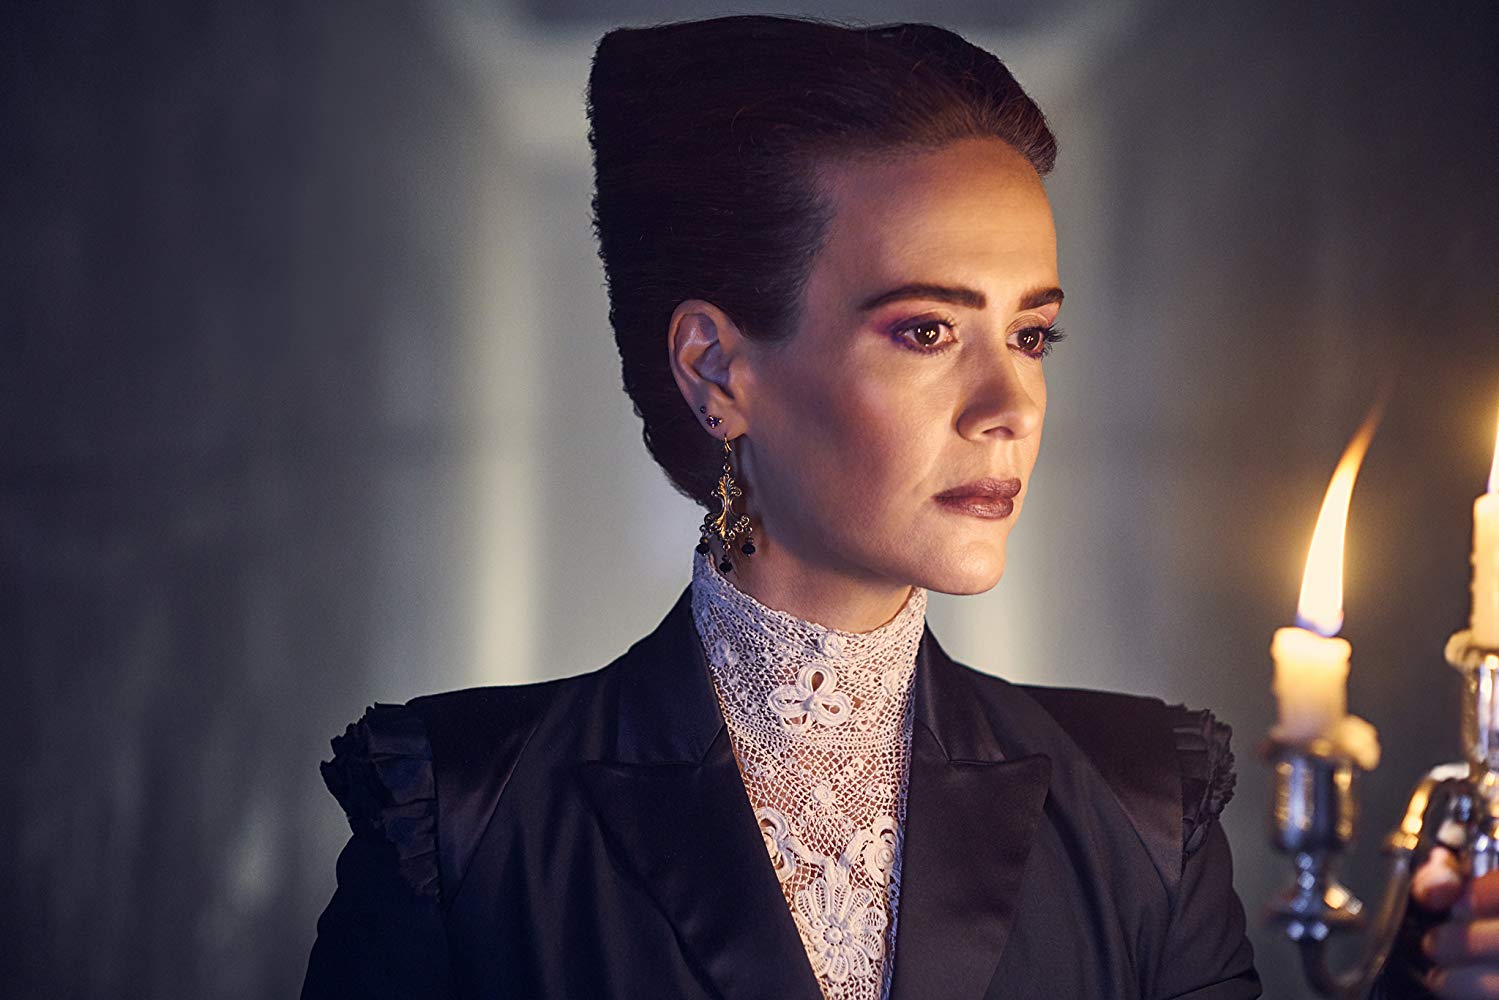 Sarah Paulson Is Returning To Carry ‘American Horror Story’ On Her Shoulders In Season 10